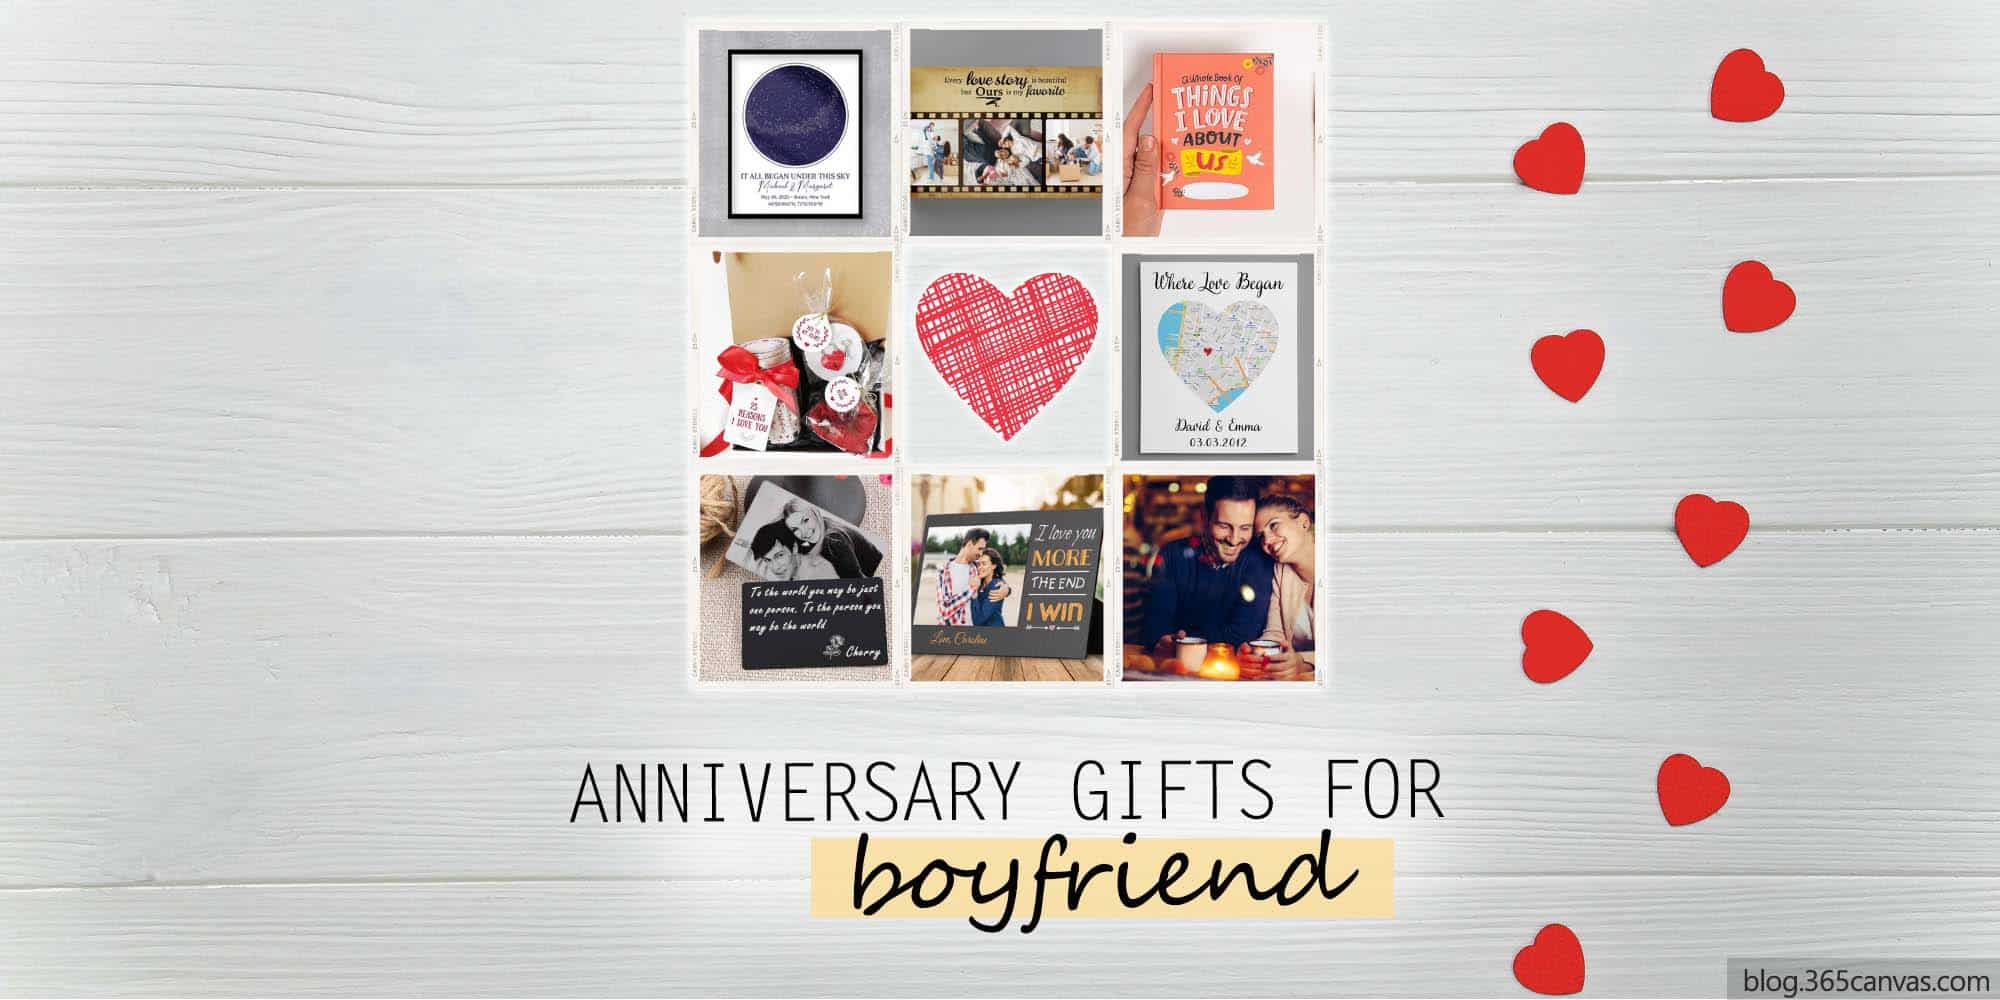 Dating Anniversary Gifts for Boyfriend: 39 Cute And Creative Gifts Your Man Will Love (2022)